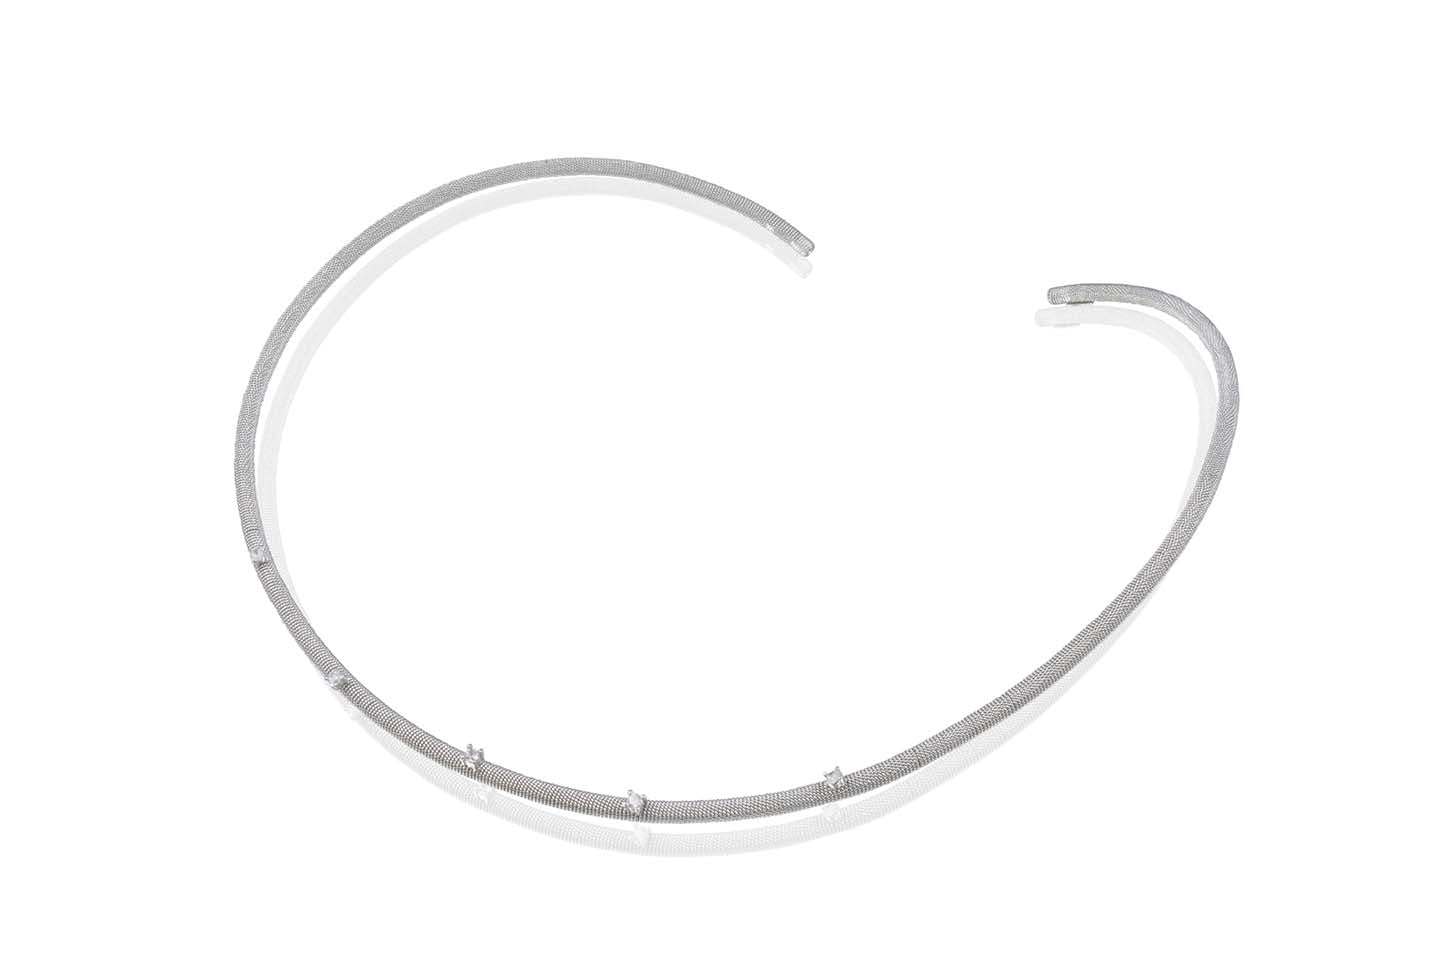 Handmade Silver Choker Necklace with Zirconium Touch